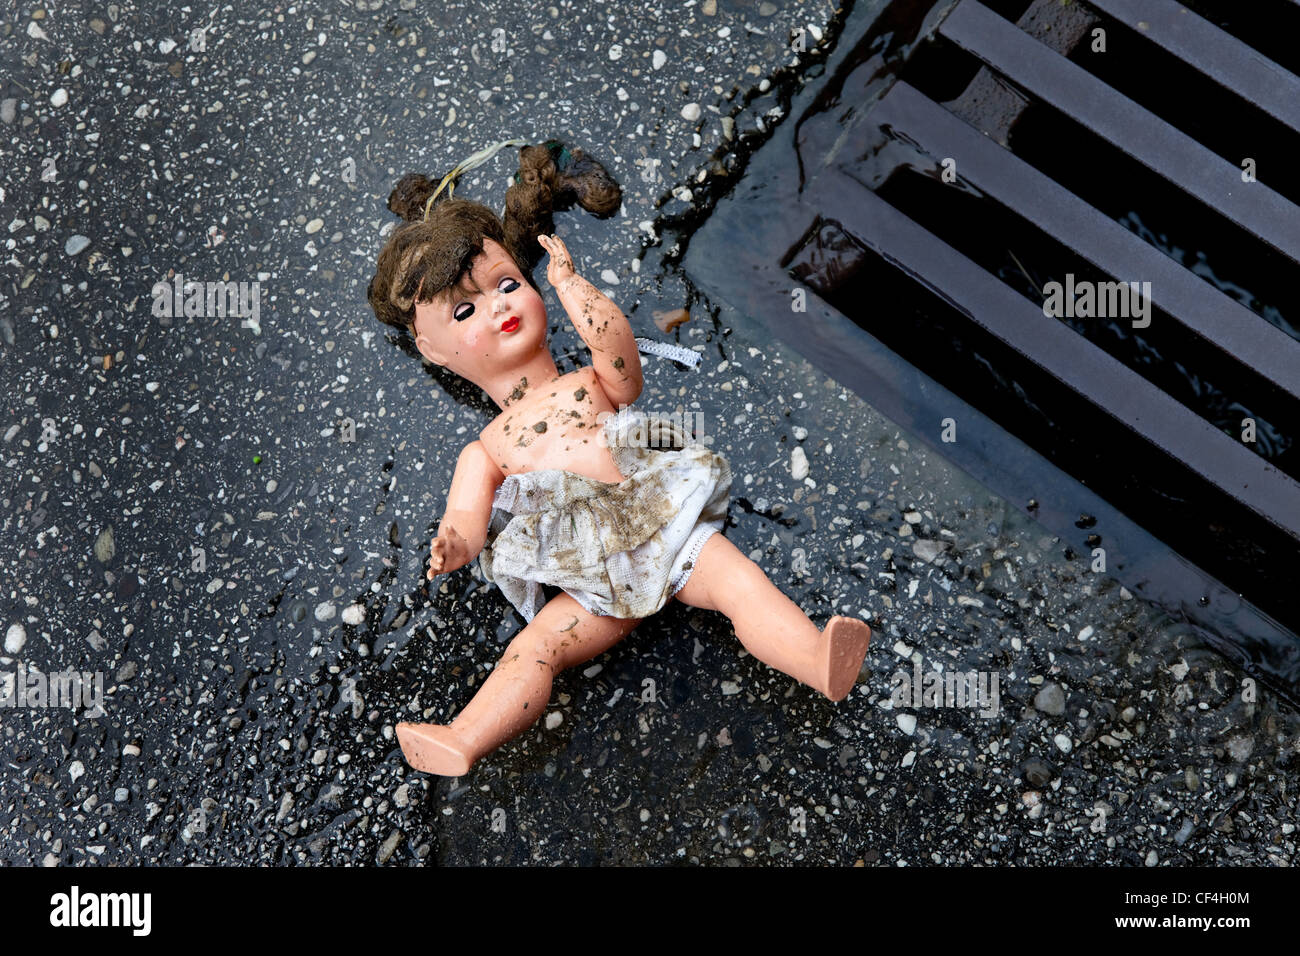 symbol of mistreatment and abuse of children Stock Photo